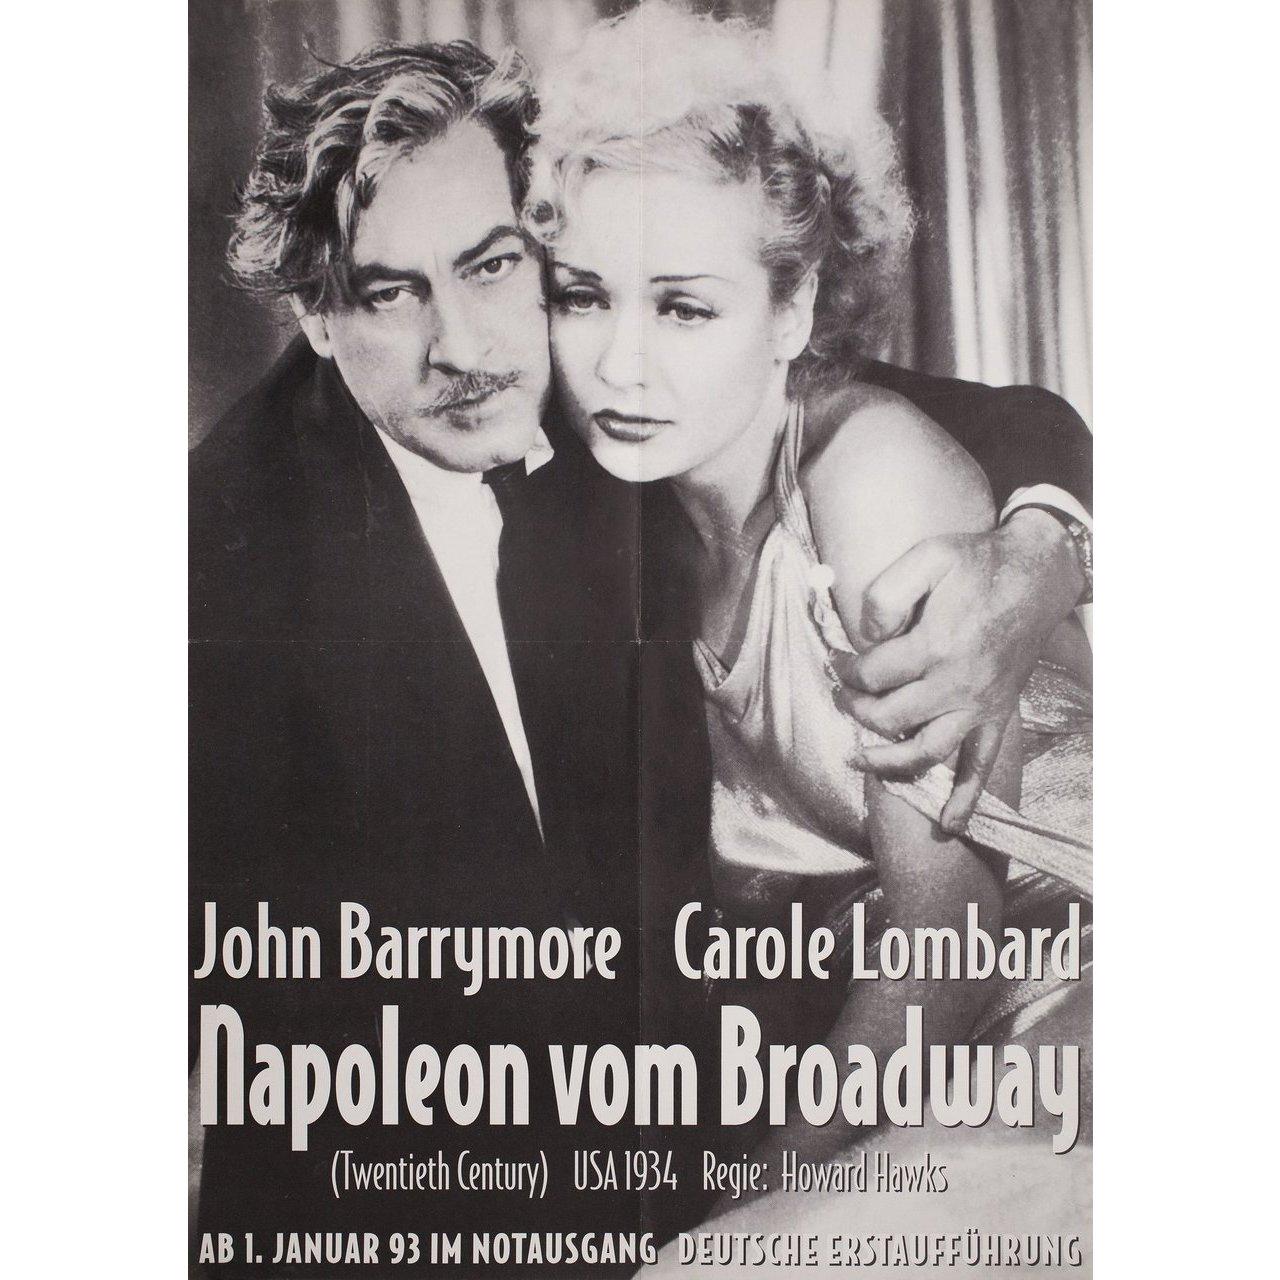 Original 1993 re-release German A1 poster for the 1934 film Twentieth Century directed by Howard Hawks with John Barrymore / Carole Lombard / Walter Connolly / Roscoe Karns. Very Good-Fine condition, folded. Many original posters were issued folded